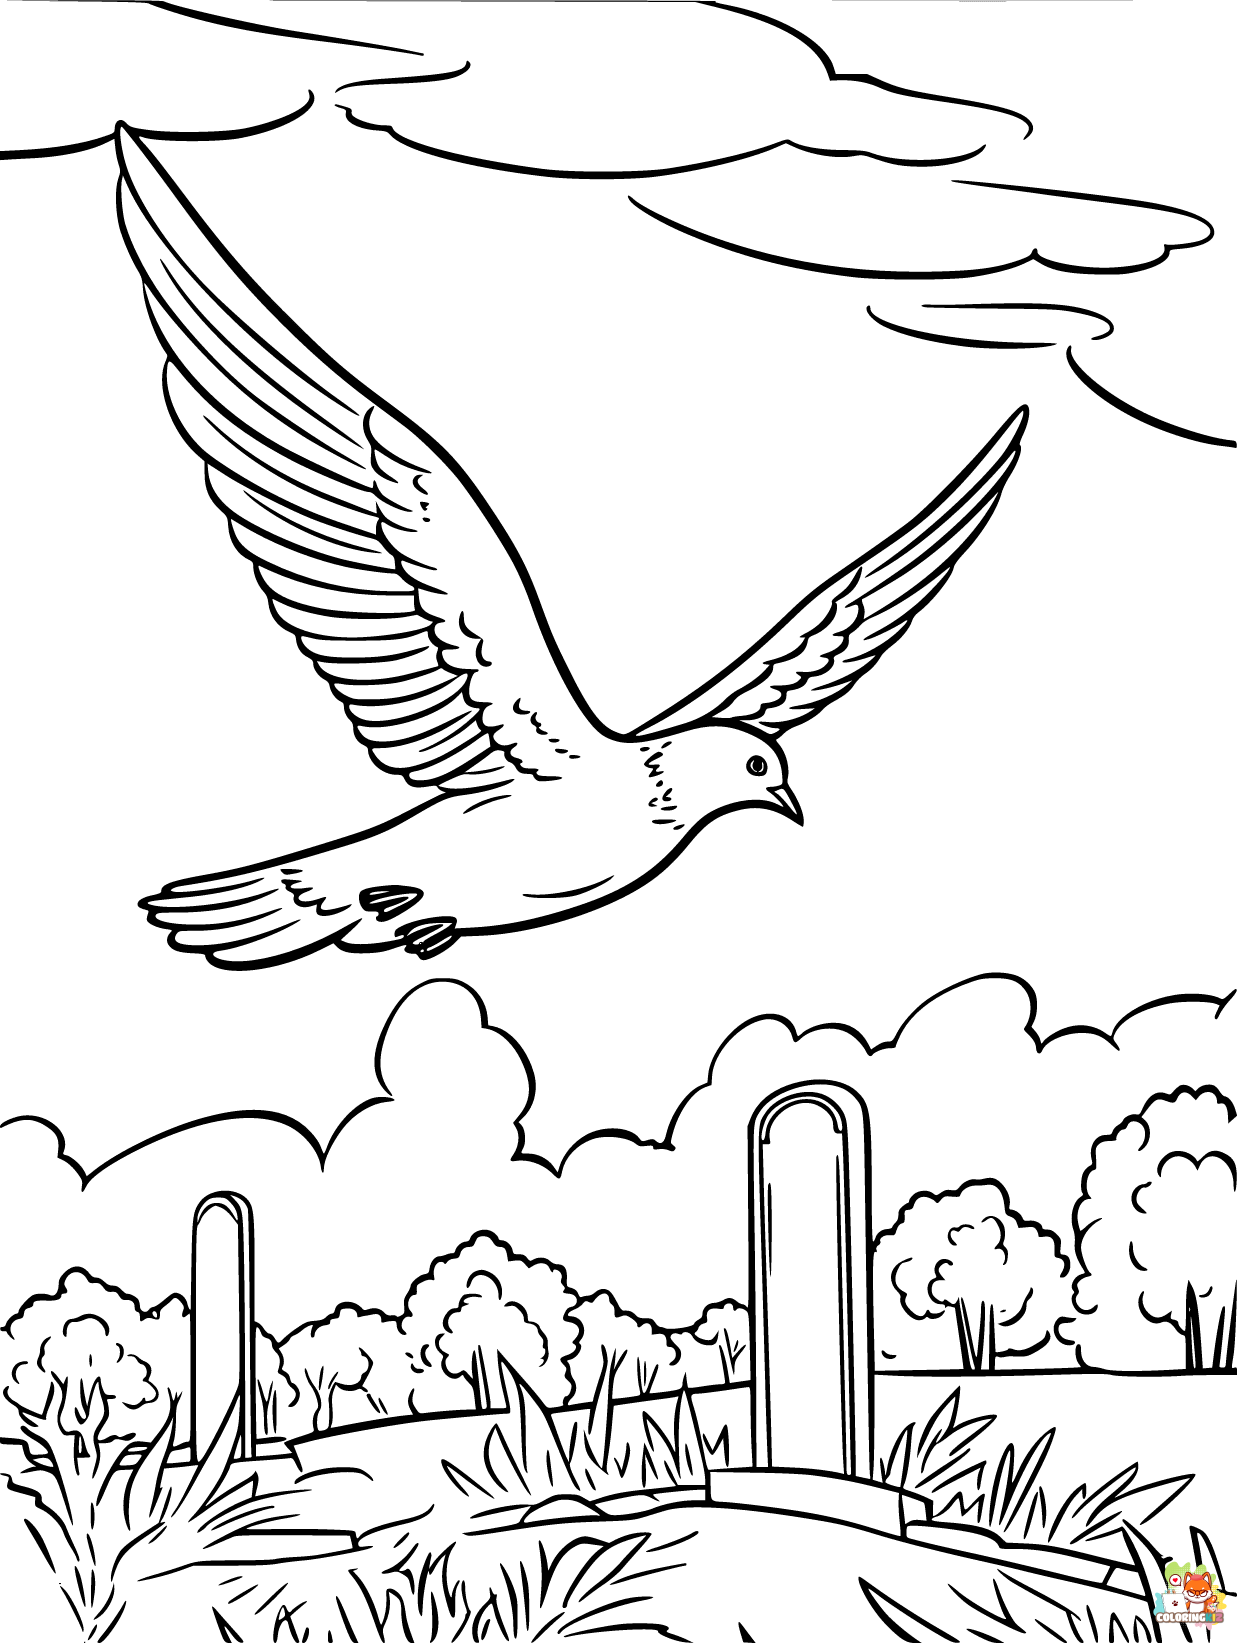 Memorial Day coloring pages 1